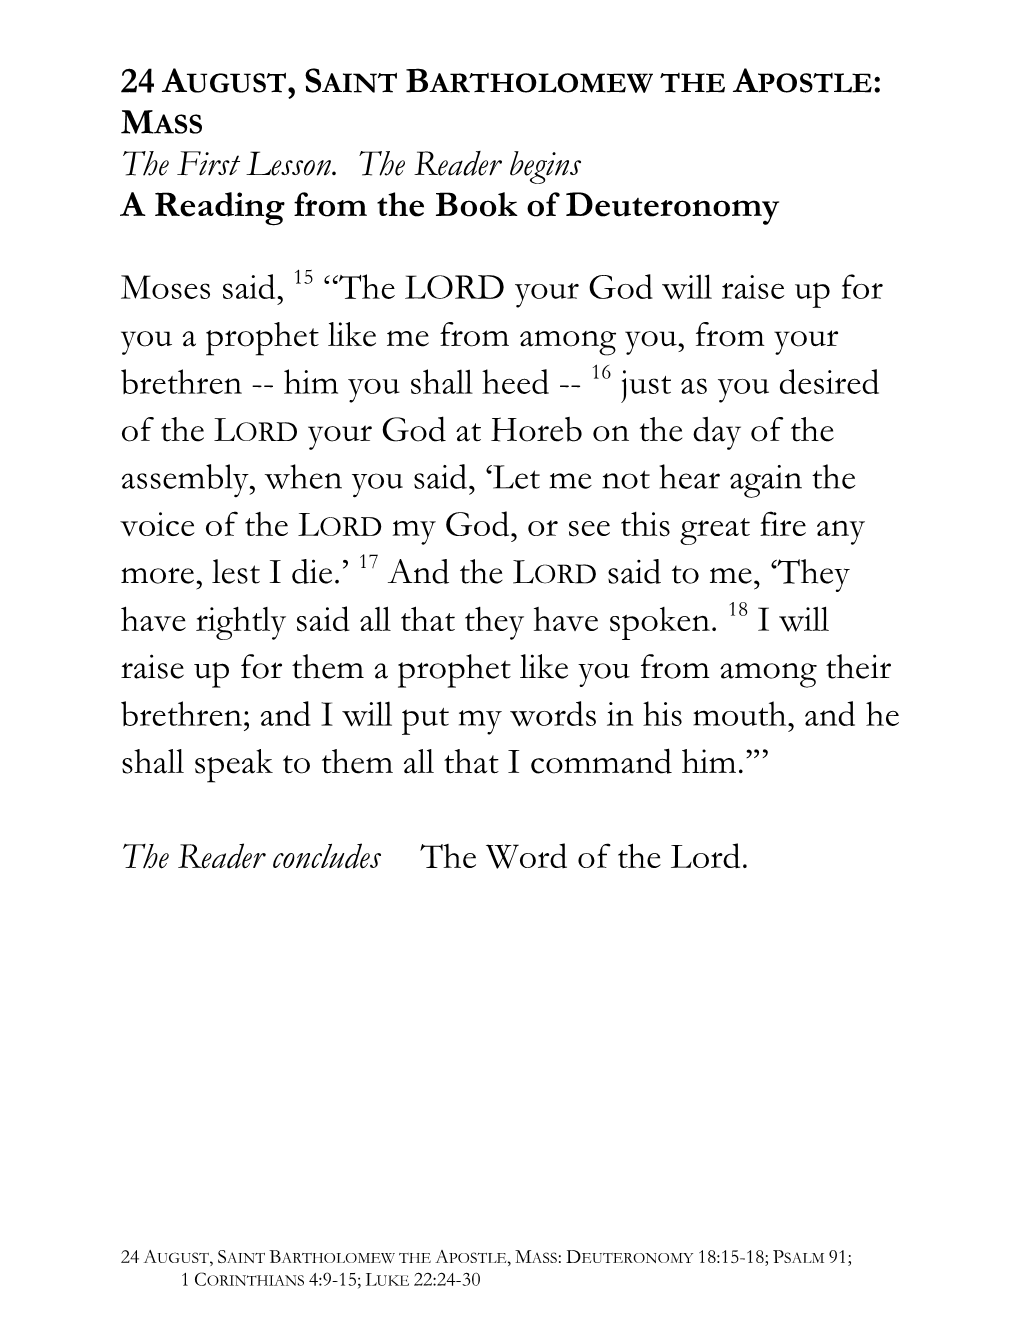 The First Lesson. the Reader Begins a Reading from the Book of Deuteronomy